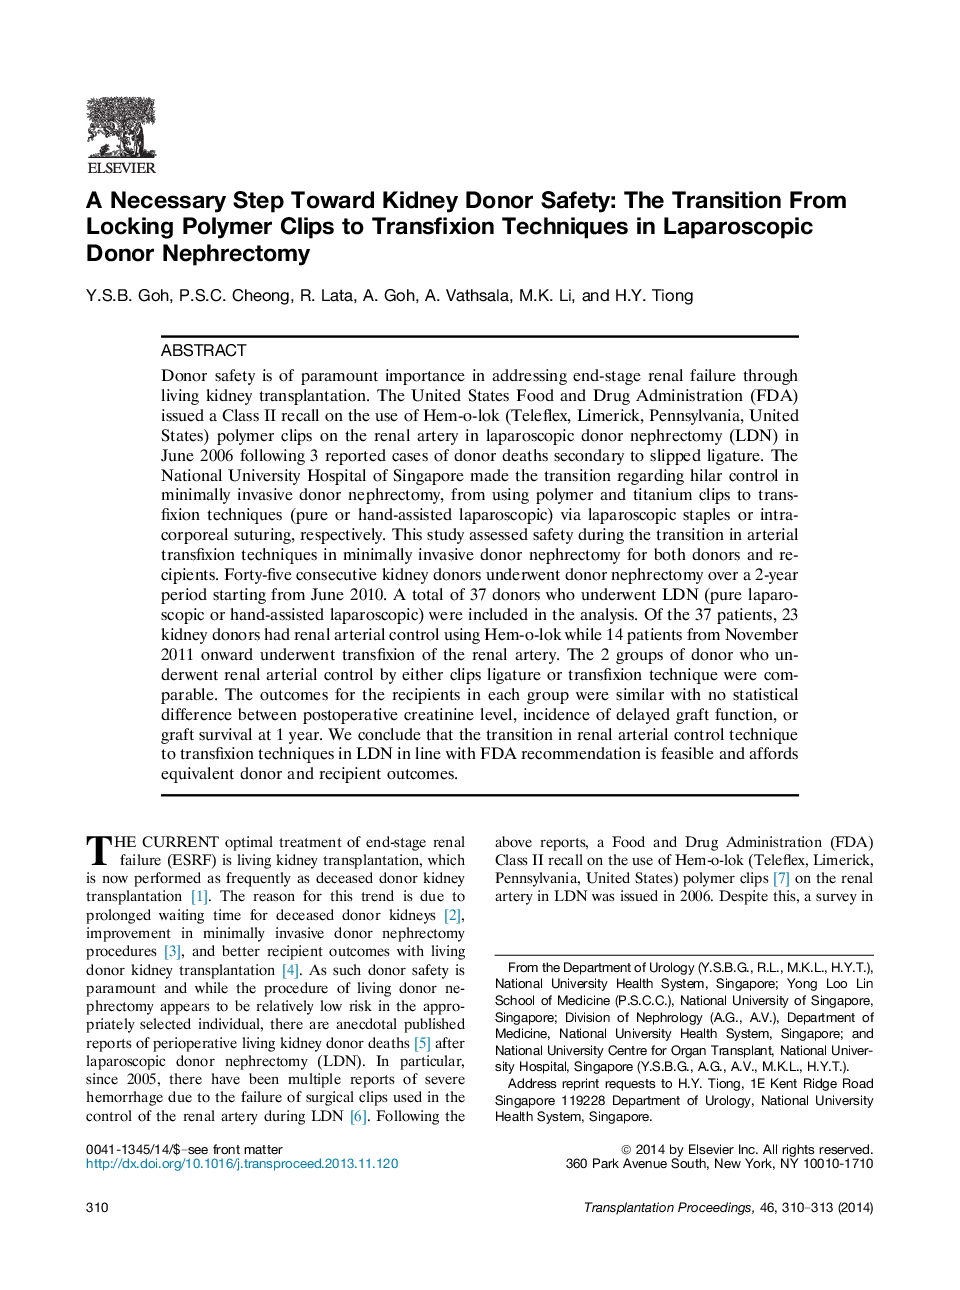 A Necessary Step Toward Kidney Donor Safety: The Transition From Locking Polymer Clips to Transfixion Techniques in Laparoscopic Donor Nephrectomy